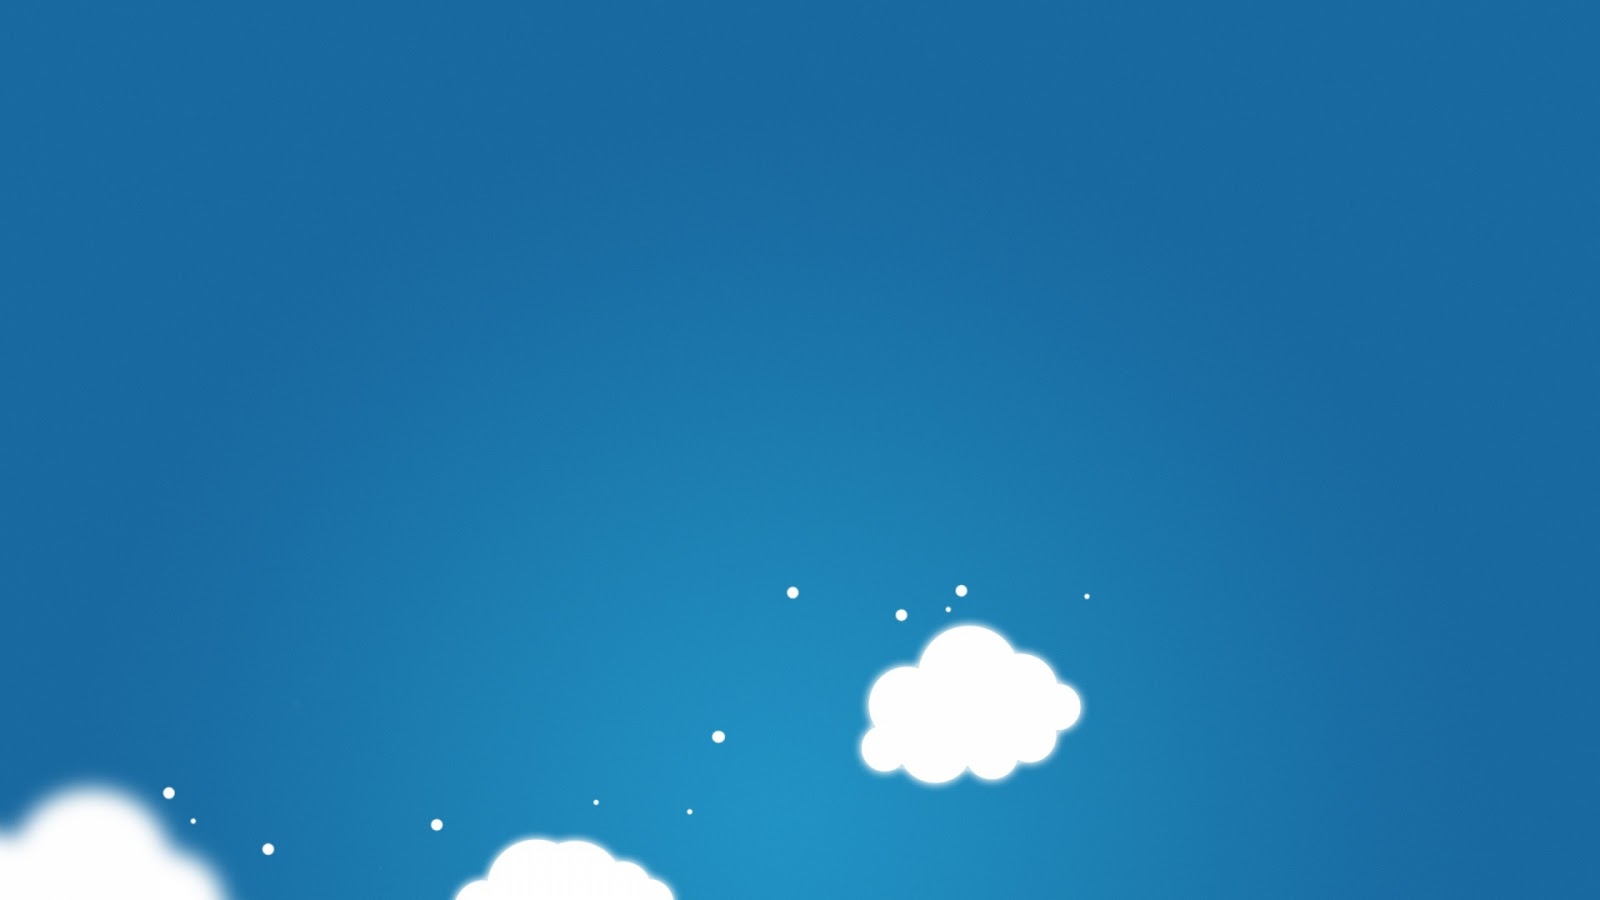 HD Wallpapers Minimal Cartoon Clouds Blue Background